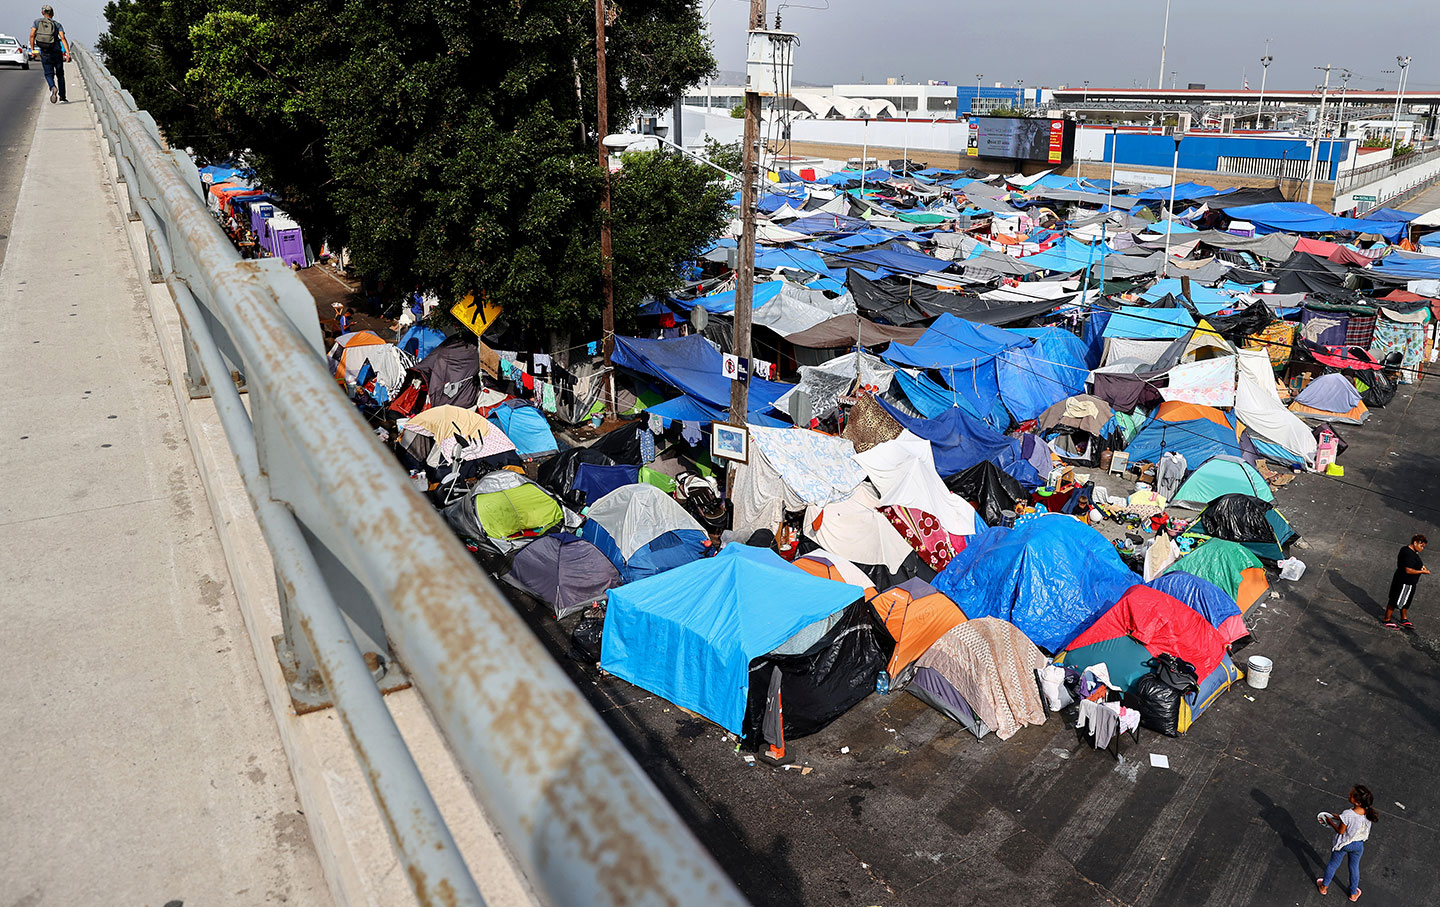 Tents of asylum-seekers at the Southern border of the US